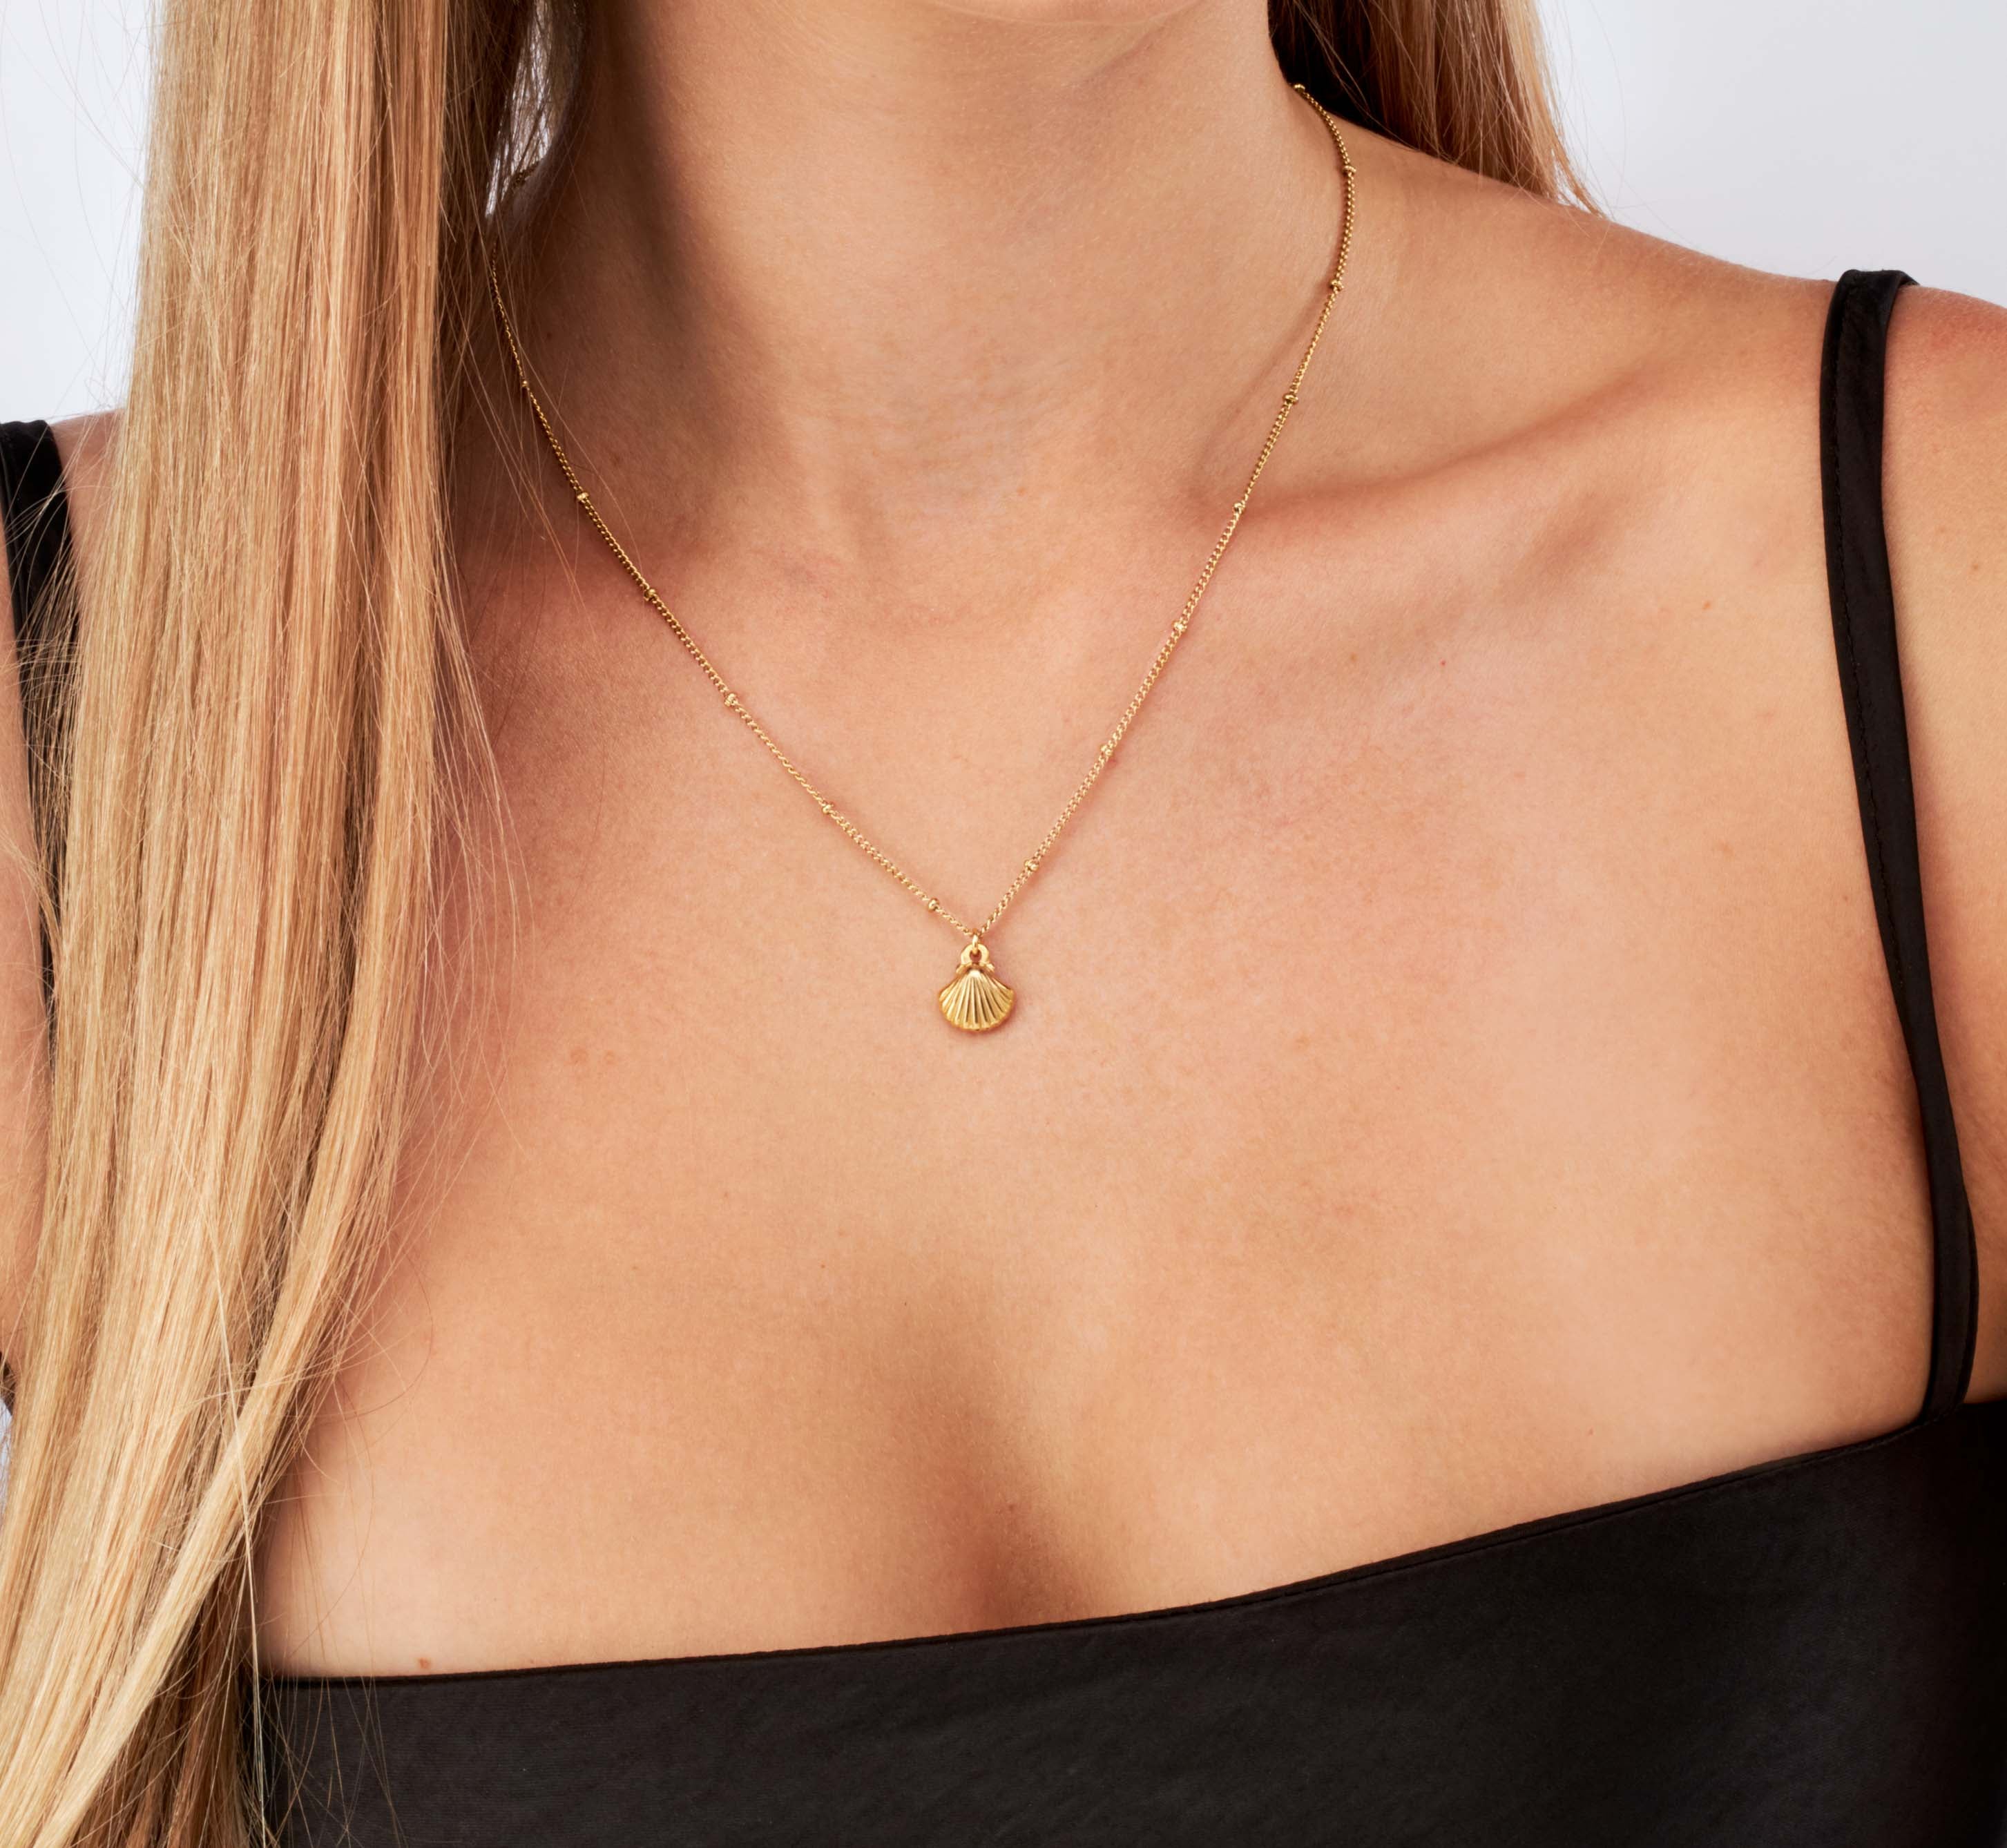 Abigail - 18k Gold Shell Necklace - Ocean Wave Jewelry